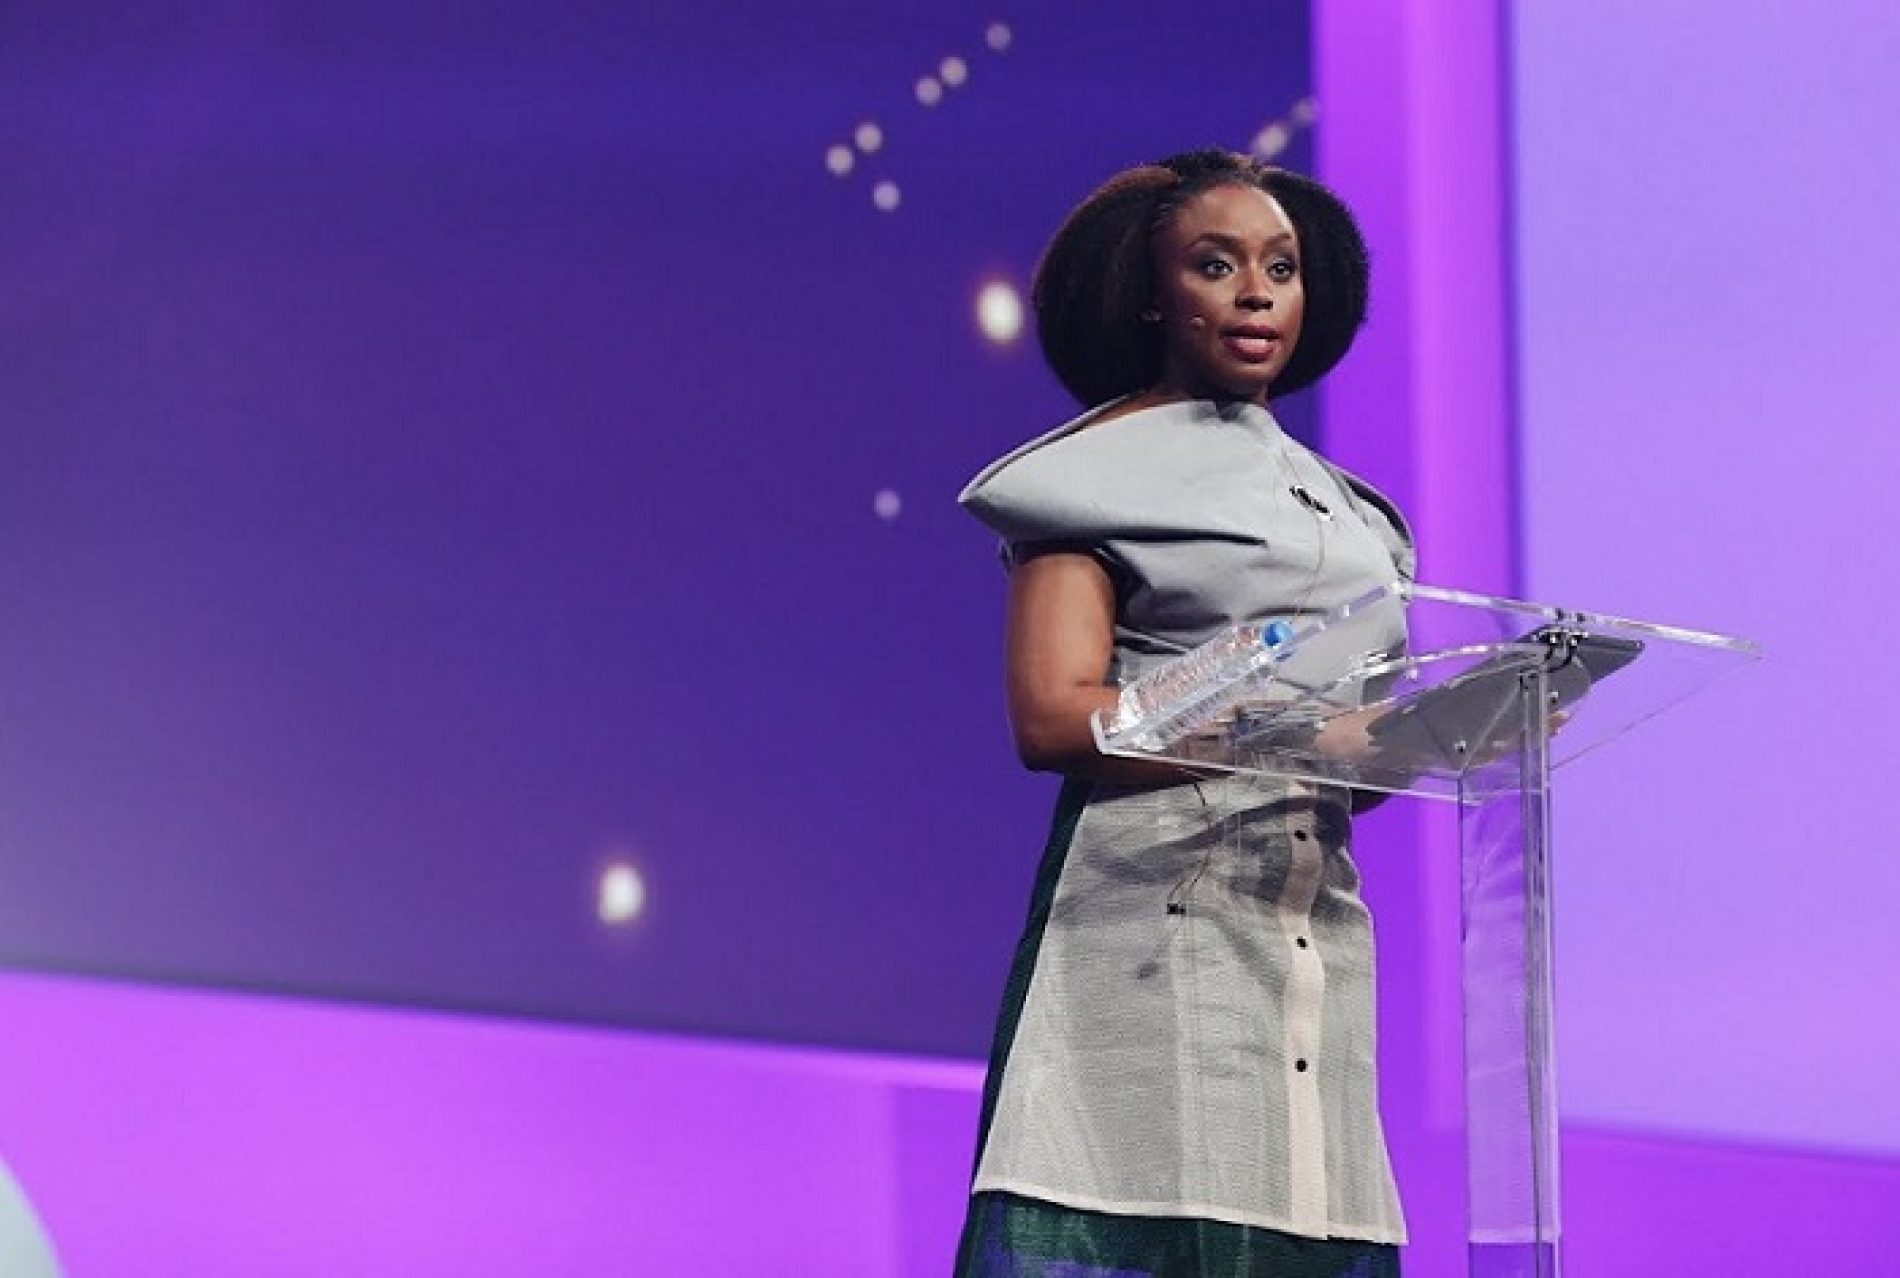 Chimamanda Ngozi Adichie: “You Do Not Become A Saint By Being Oppressed.”